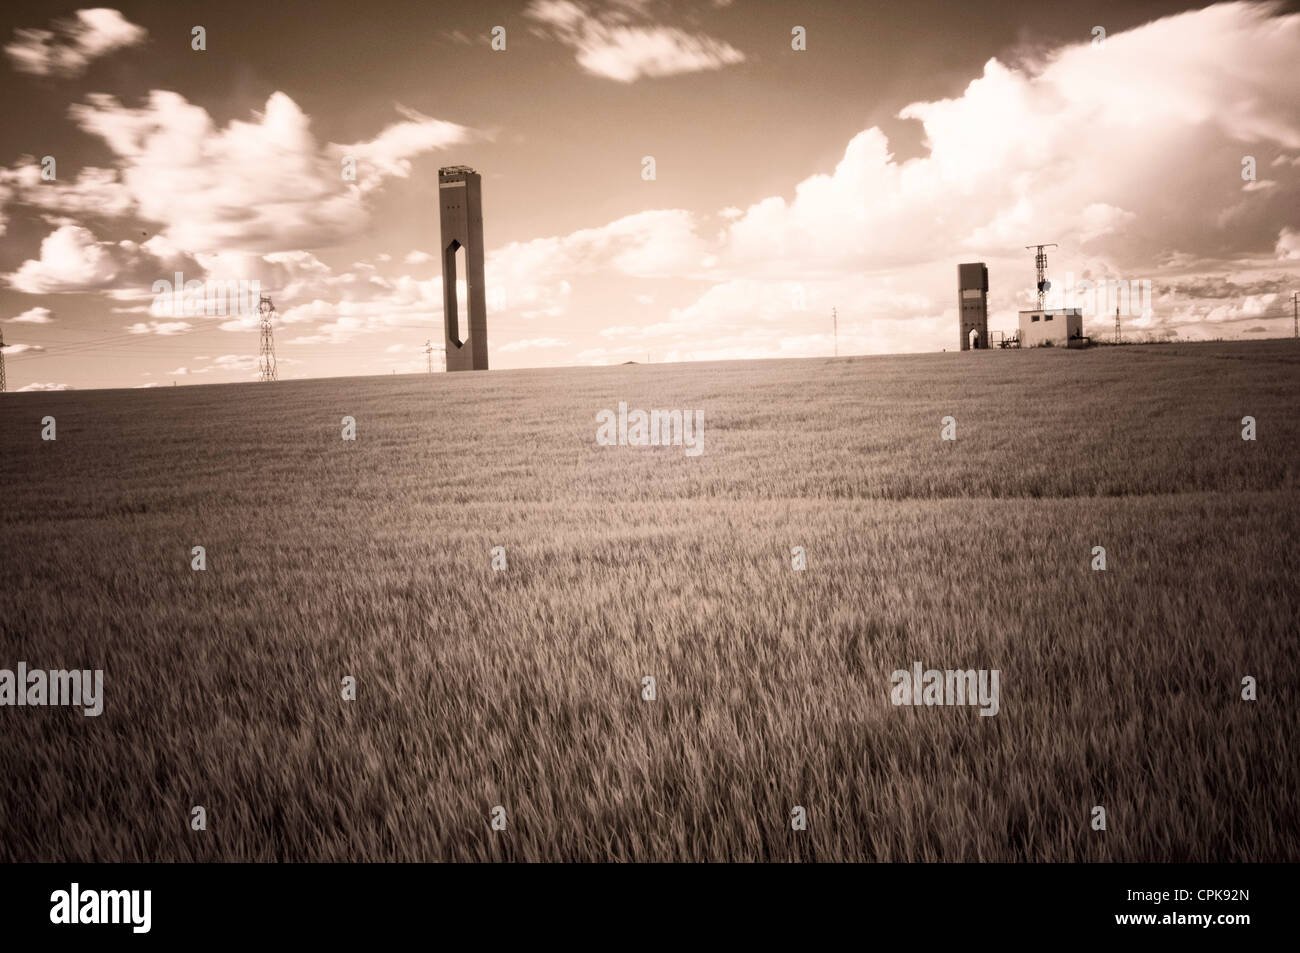 Infrared image of solar plant towers in a wheat field, Sanlucar la Mayor, Seville, Spain Stock Photo